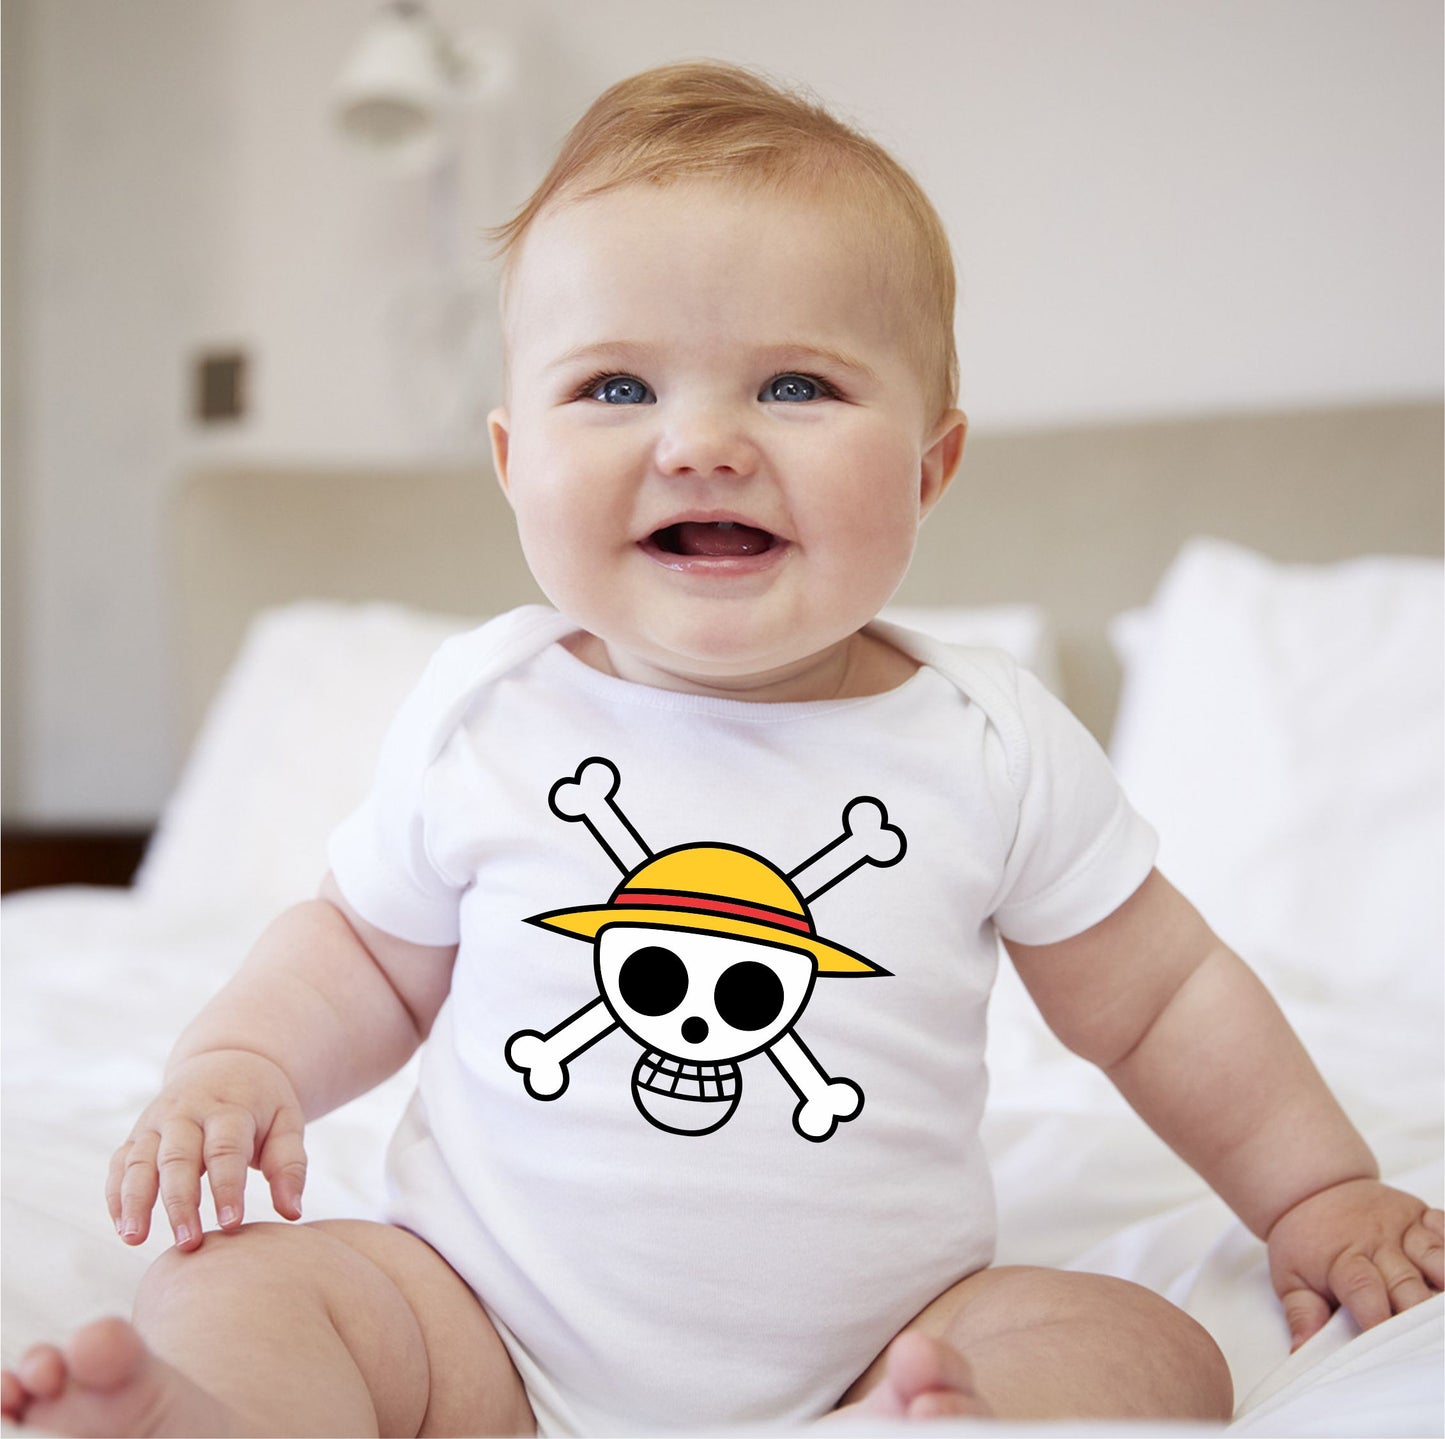 Baby Character Onesies - Jolly Roger One Piece Luffy